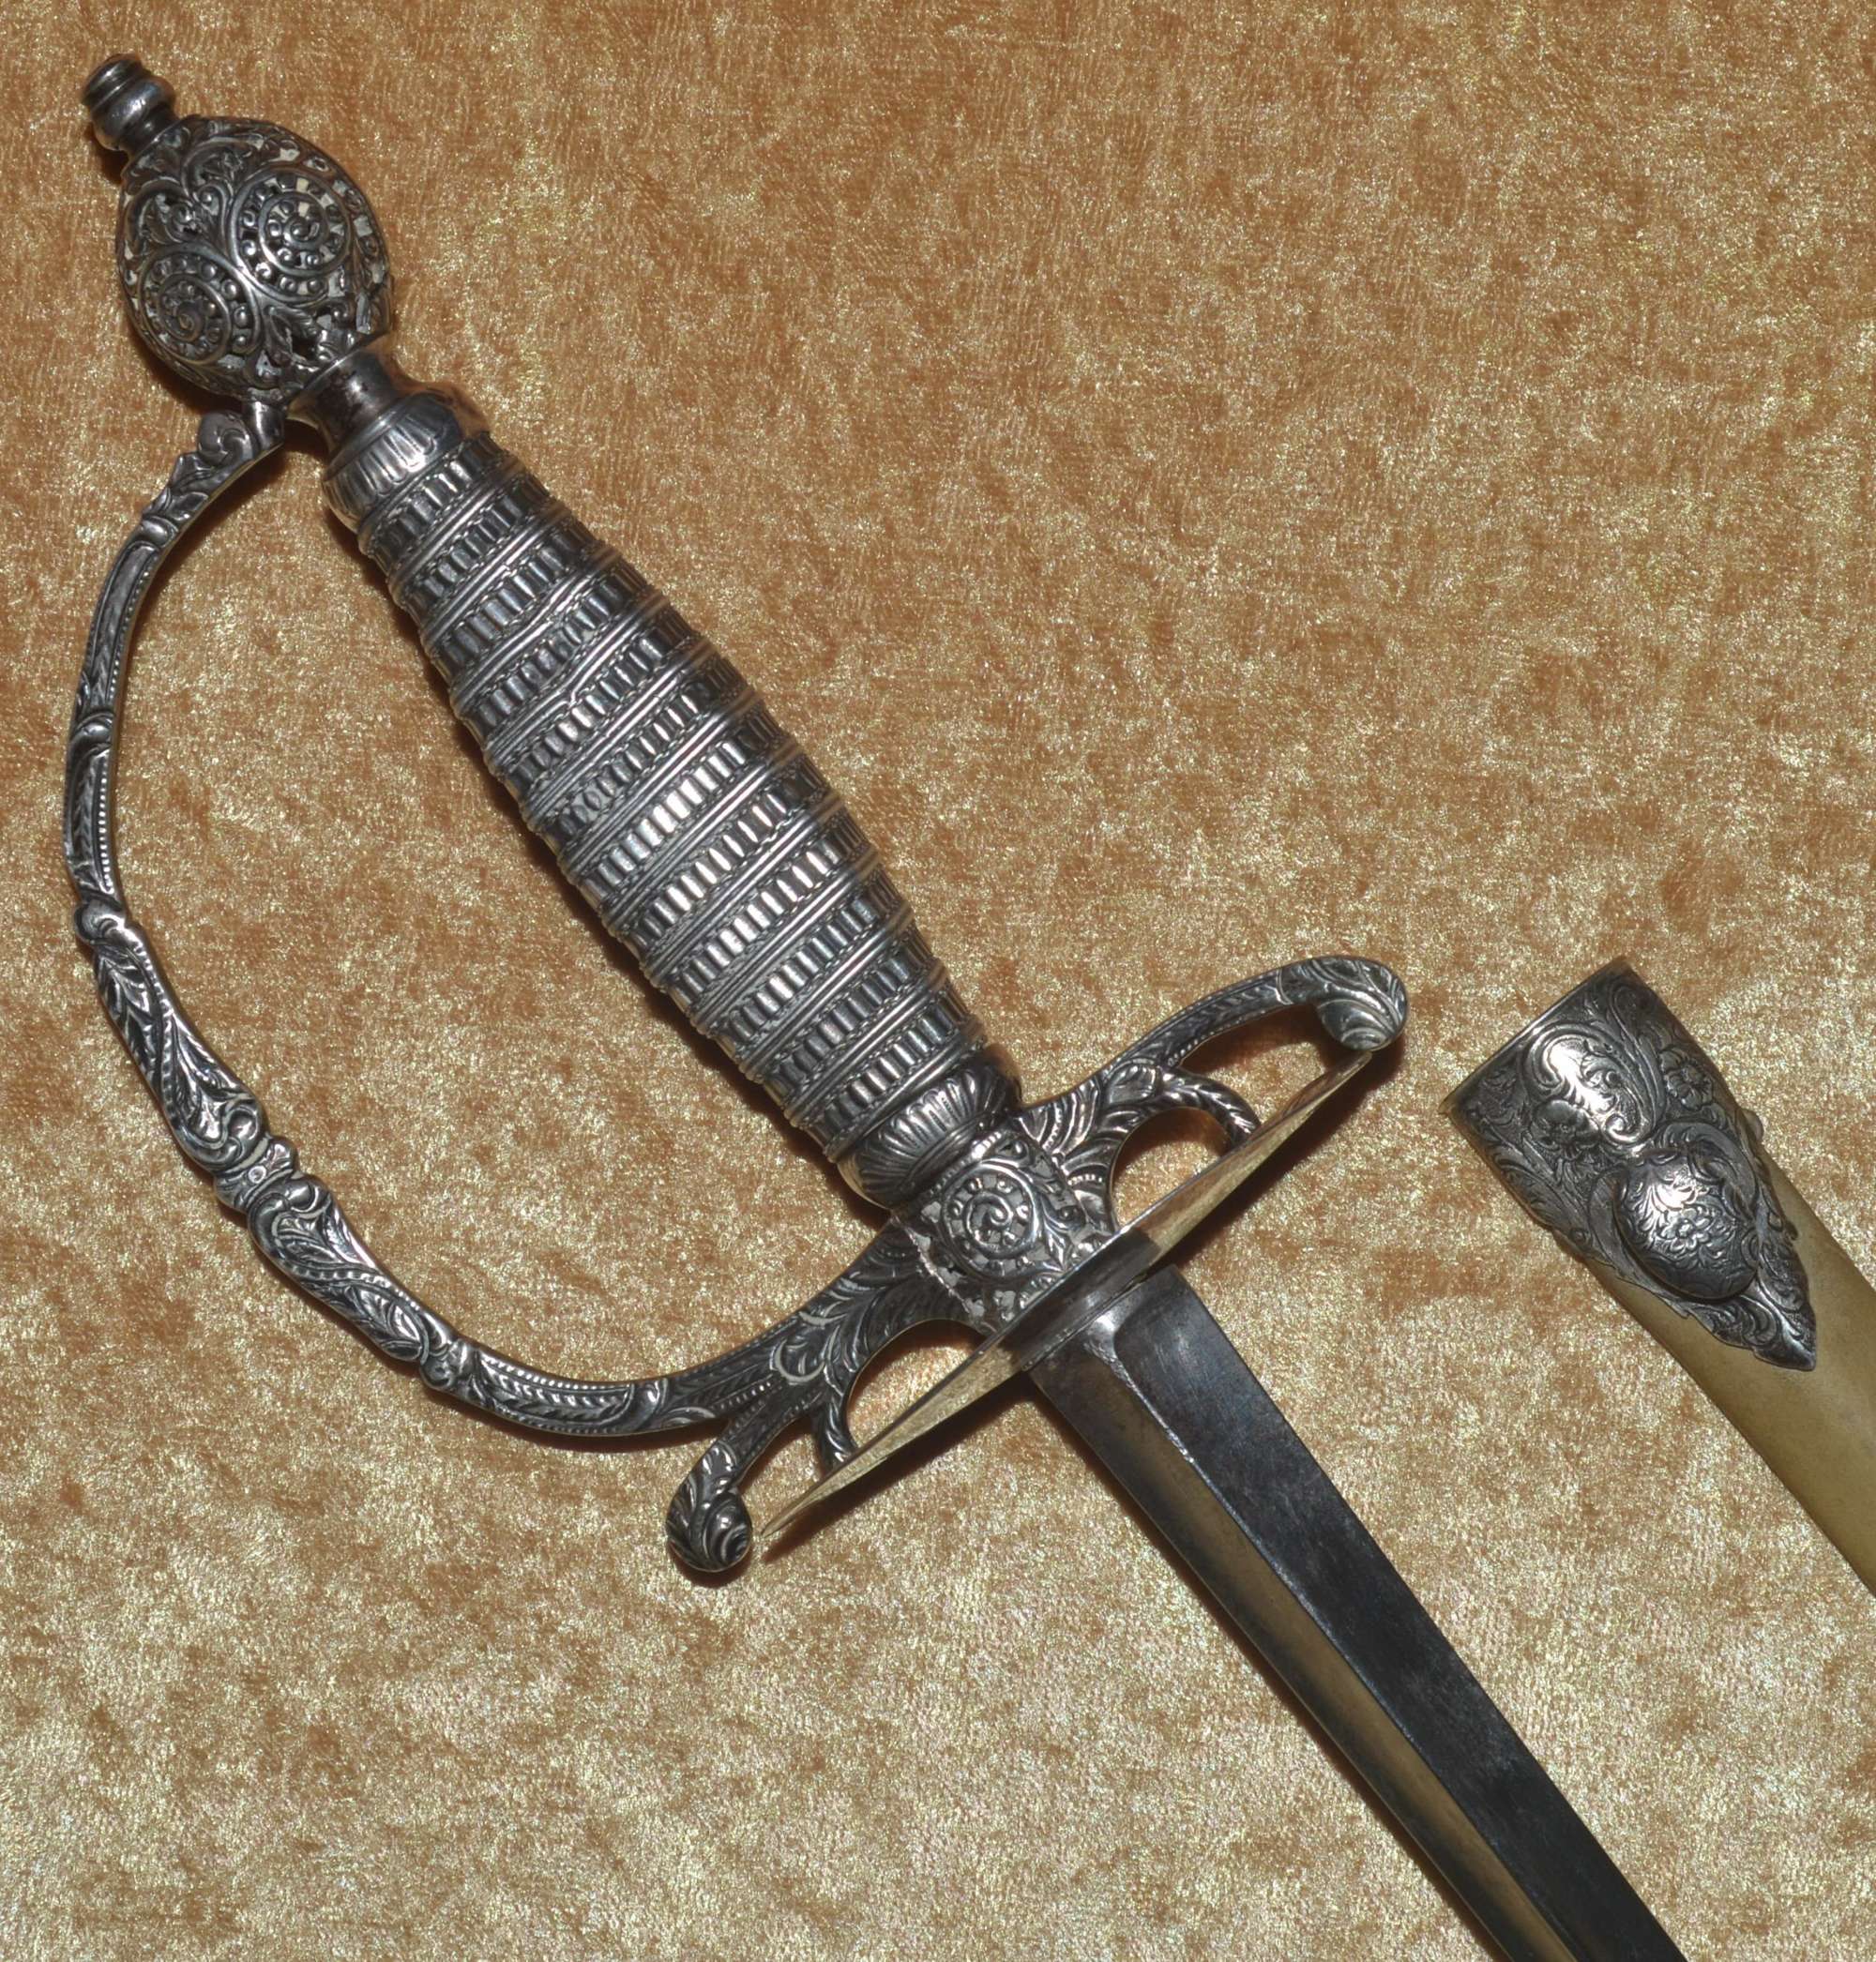 ﻿Silver Hilted Smallsword, Probably German, 2nd Half 18th C